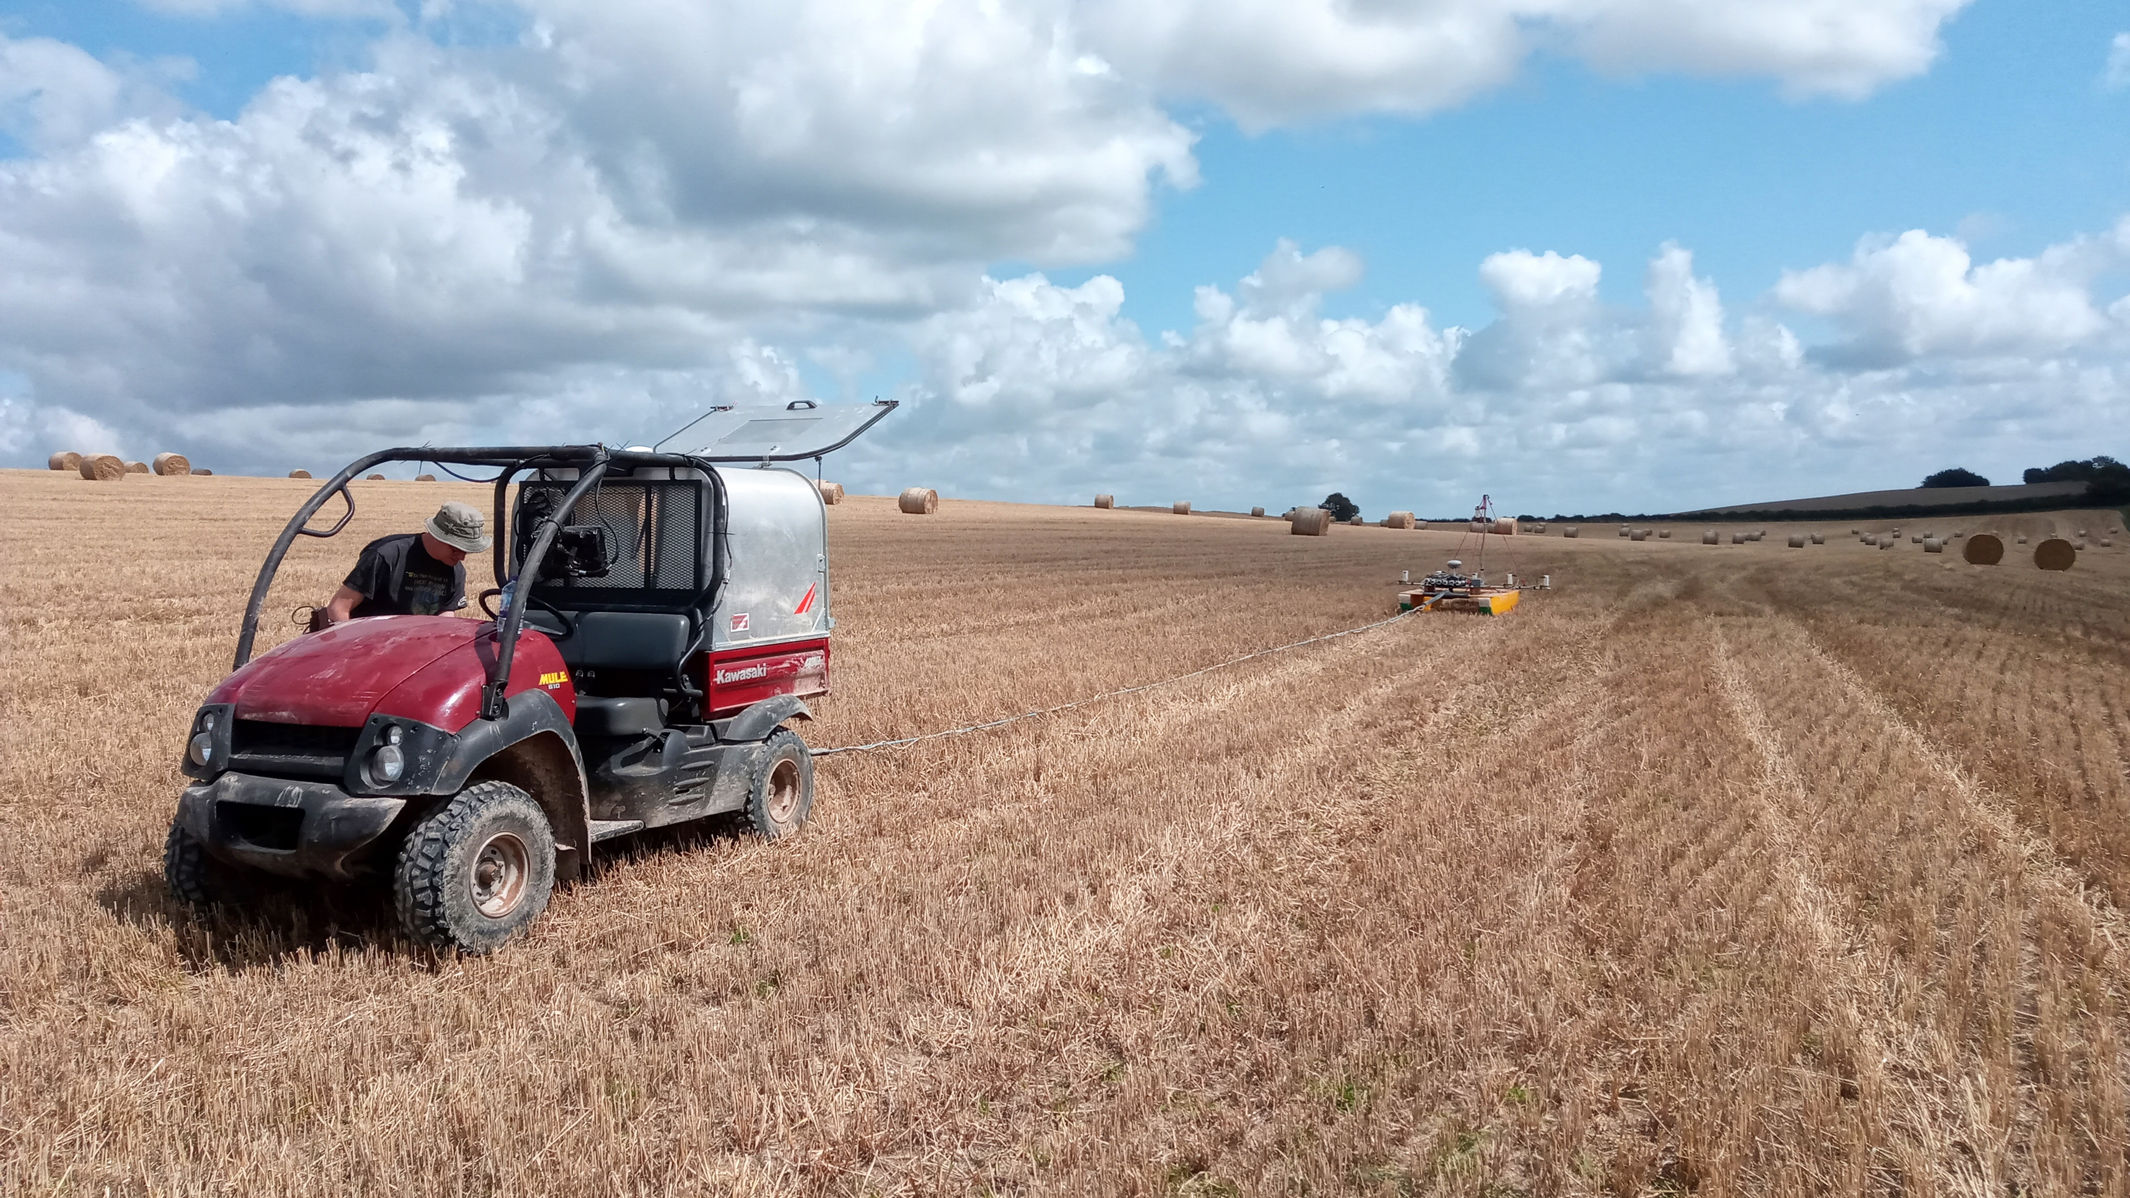 Geophysics equipment being towed across a field by a small vehicle.